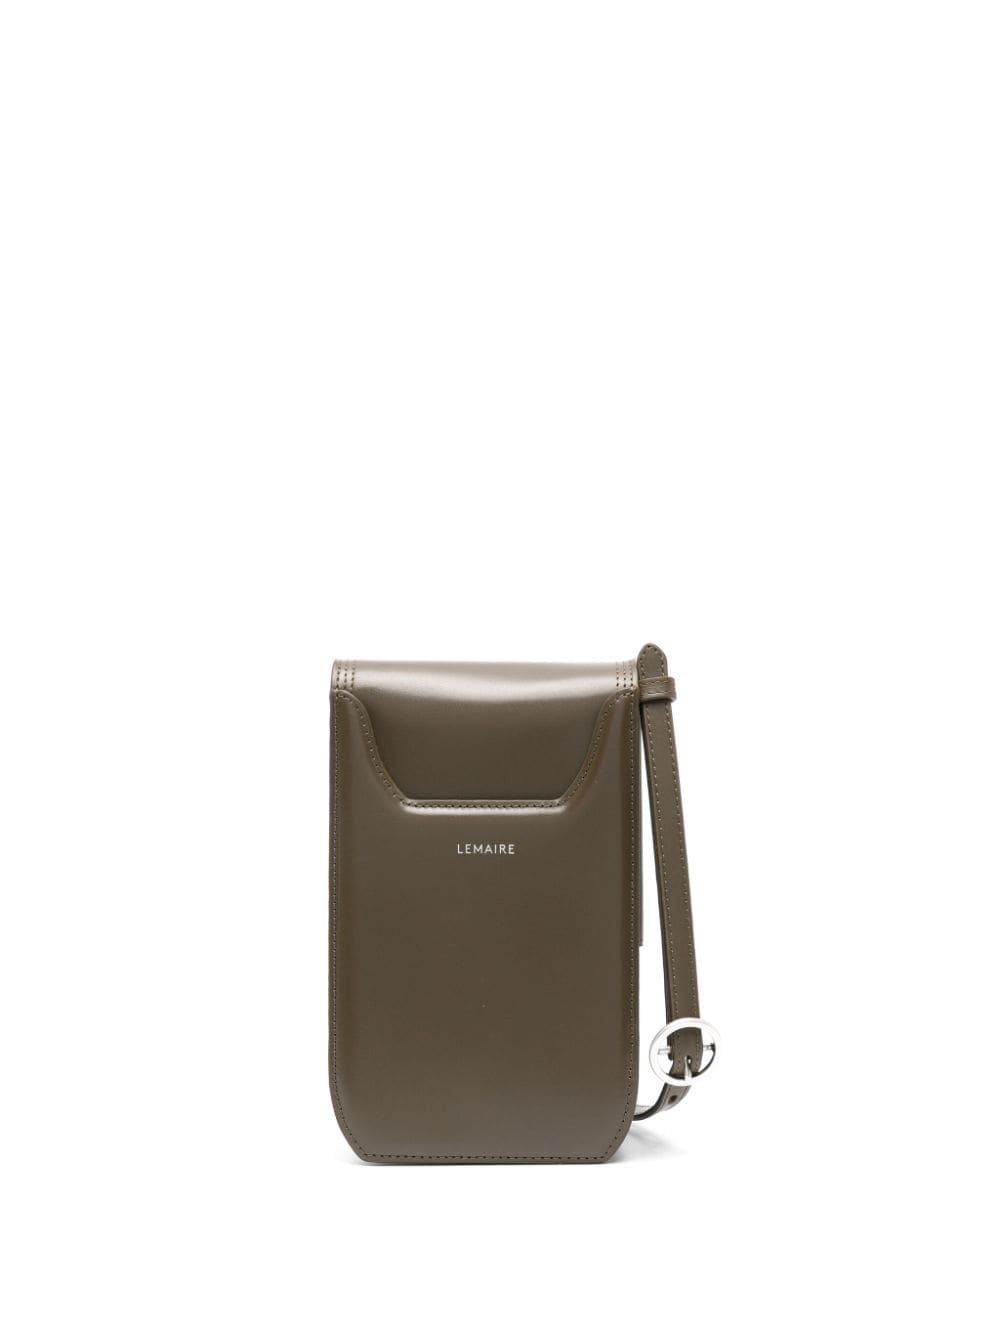 LEMAIRE SMALL CALEPIN LEATHER CROSSBODY BAG